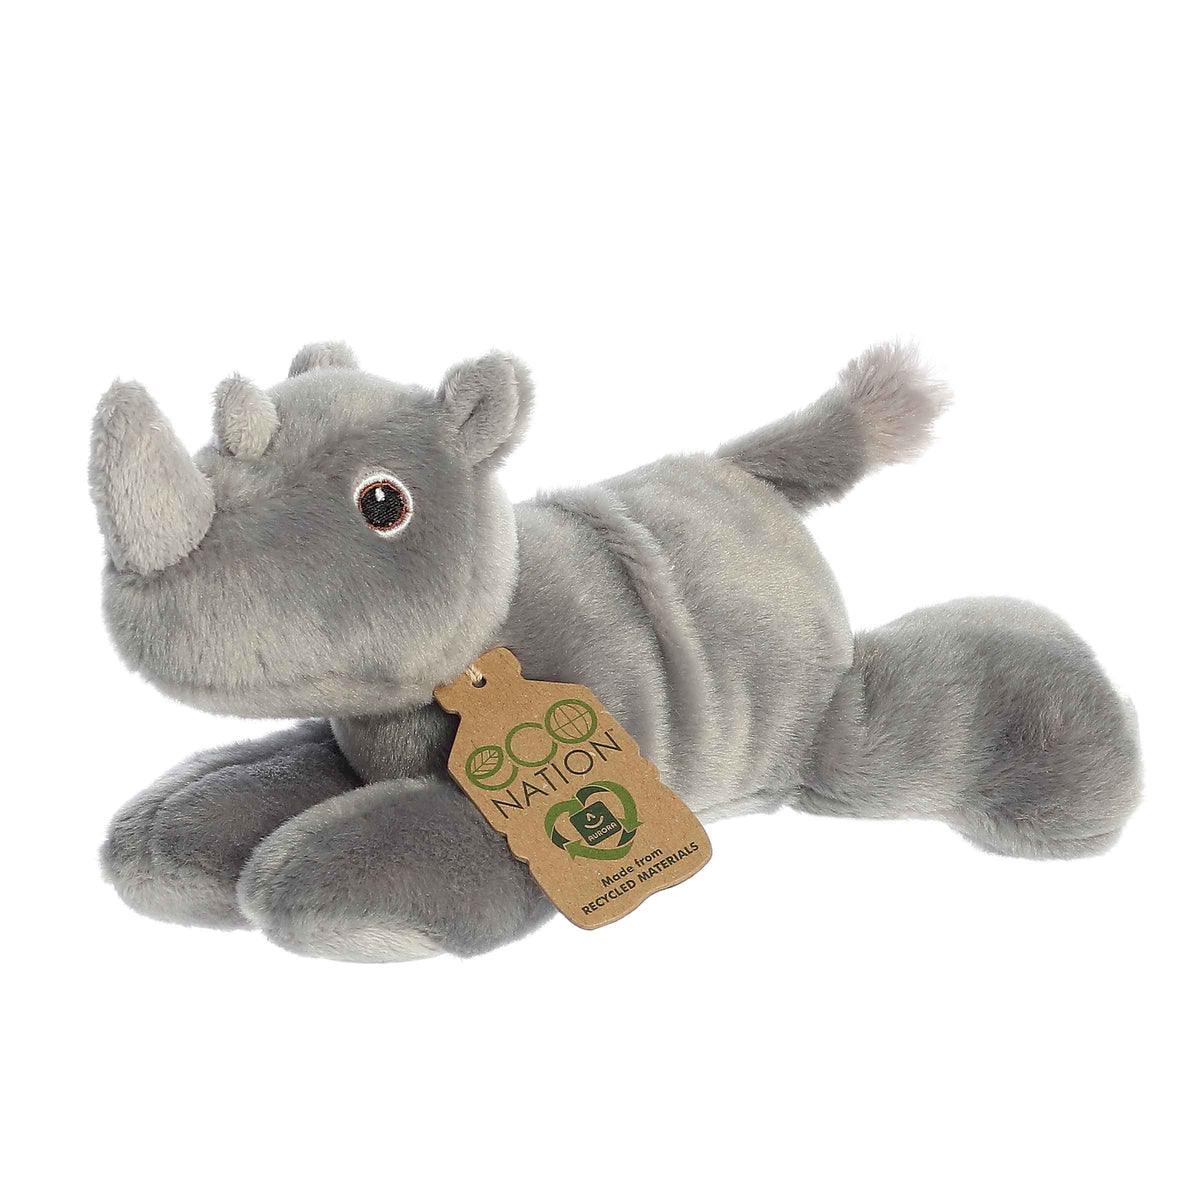 8'' Rhino plush from Eco Softies, sturdy and soft, crafted from recycled materials